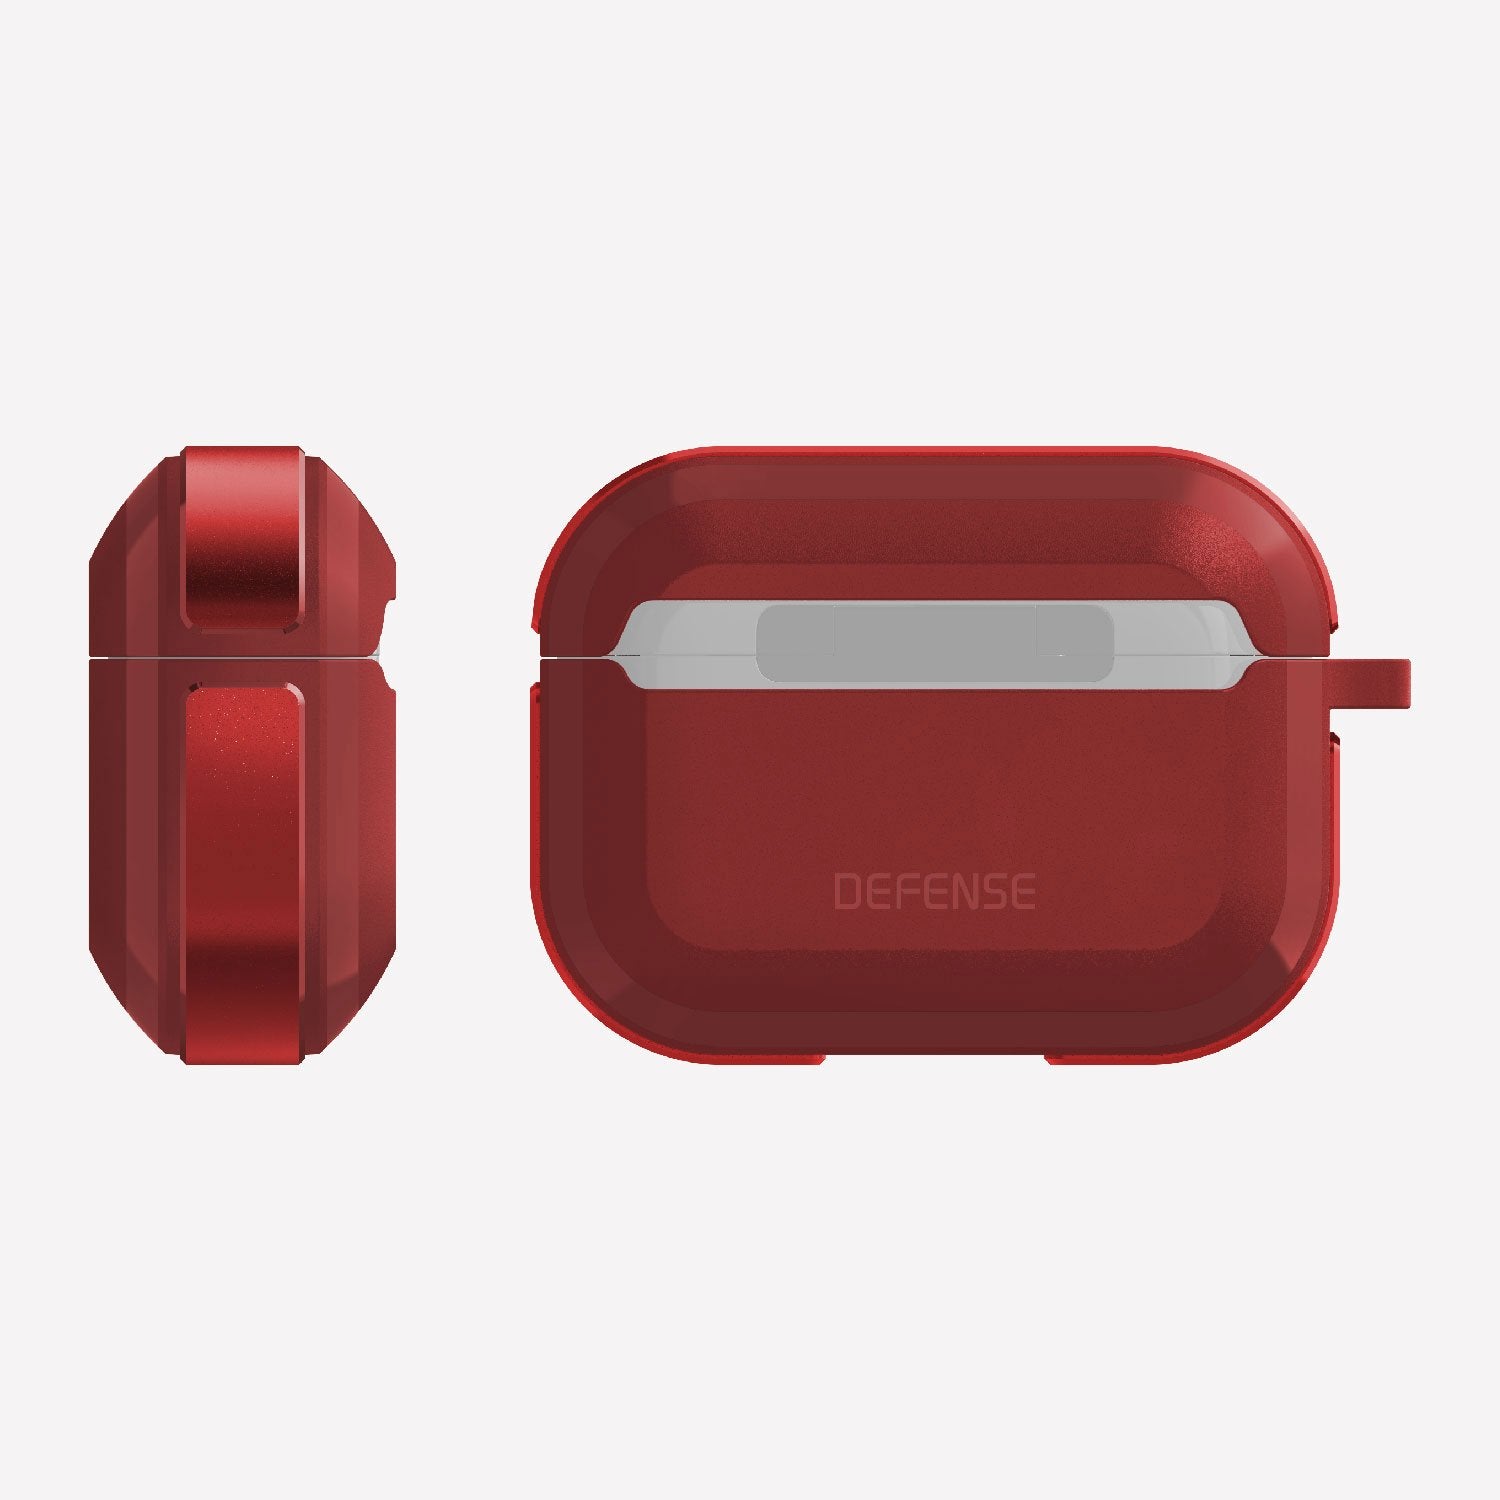 Defense Trek Red on Apple AirPods Pro showing the machined aluminum bumper Side and protective hard polycarbonate front